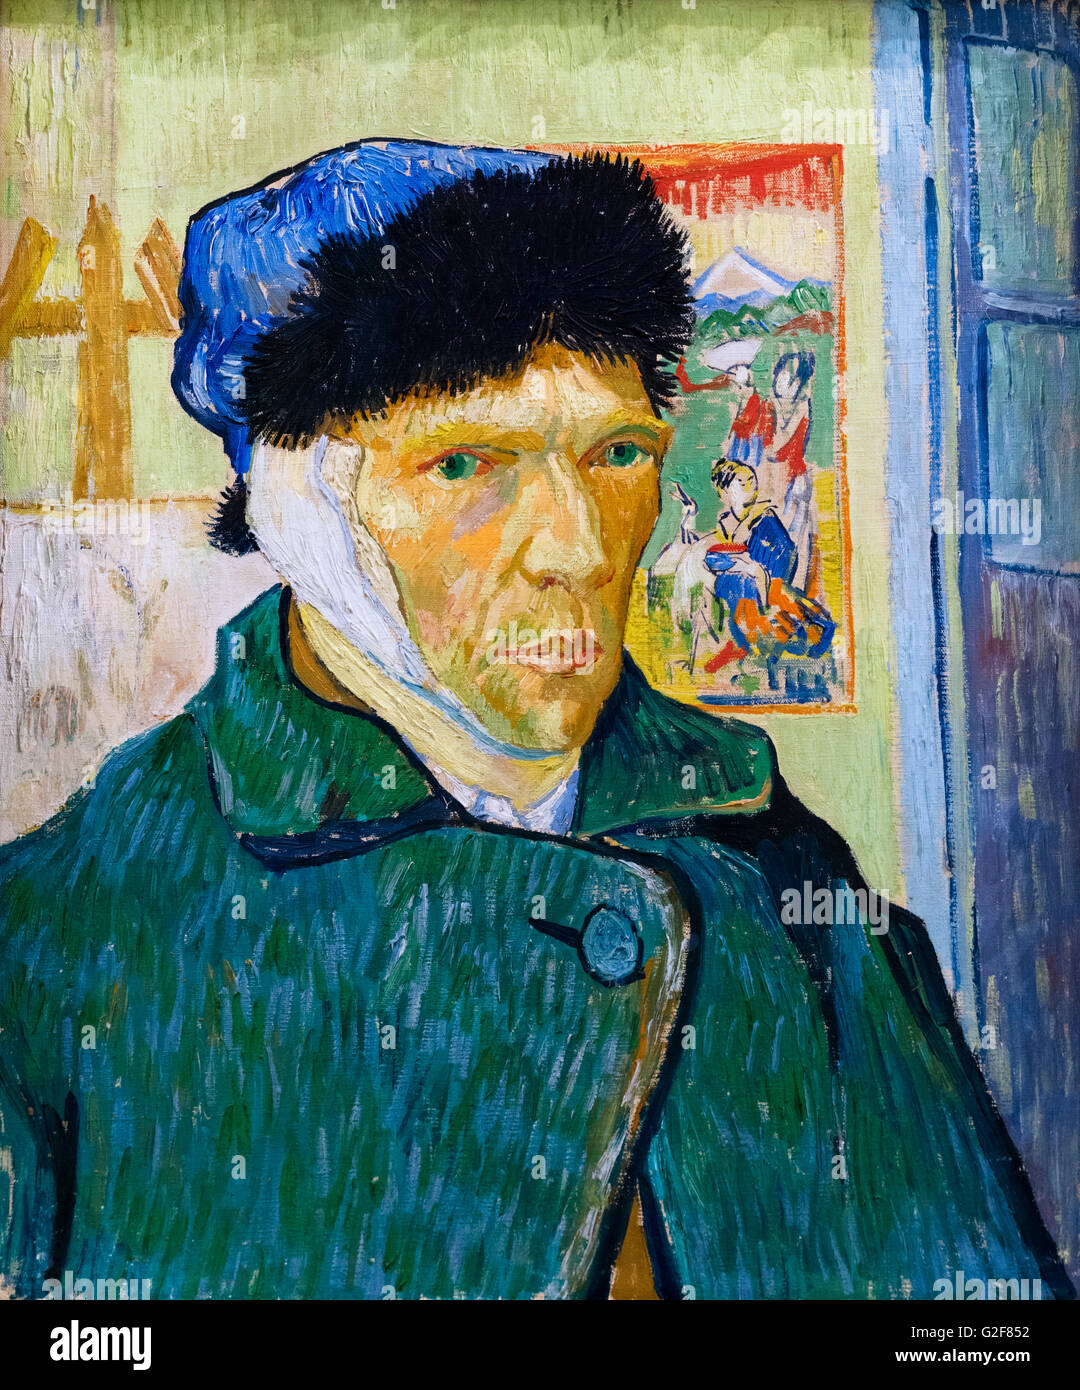 Vincent van Gogh, Self-Portrait with Bandaged Ear, oil on canvas, 1889. Stock Photo